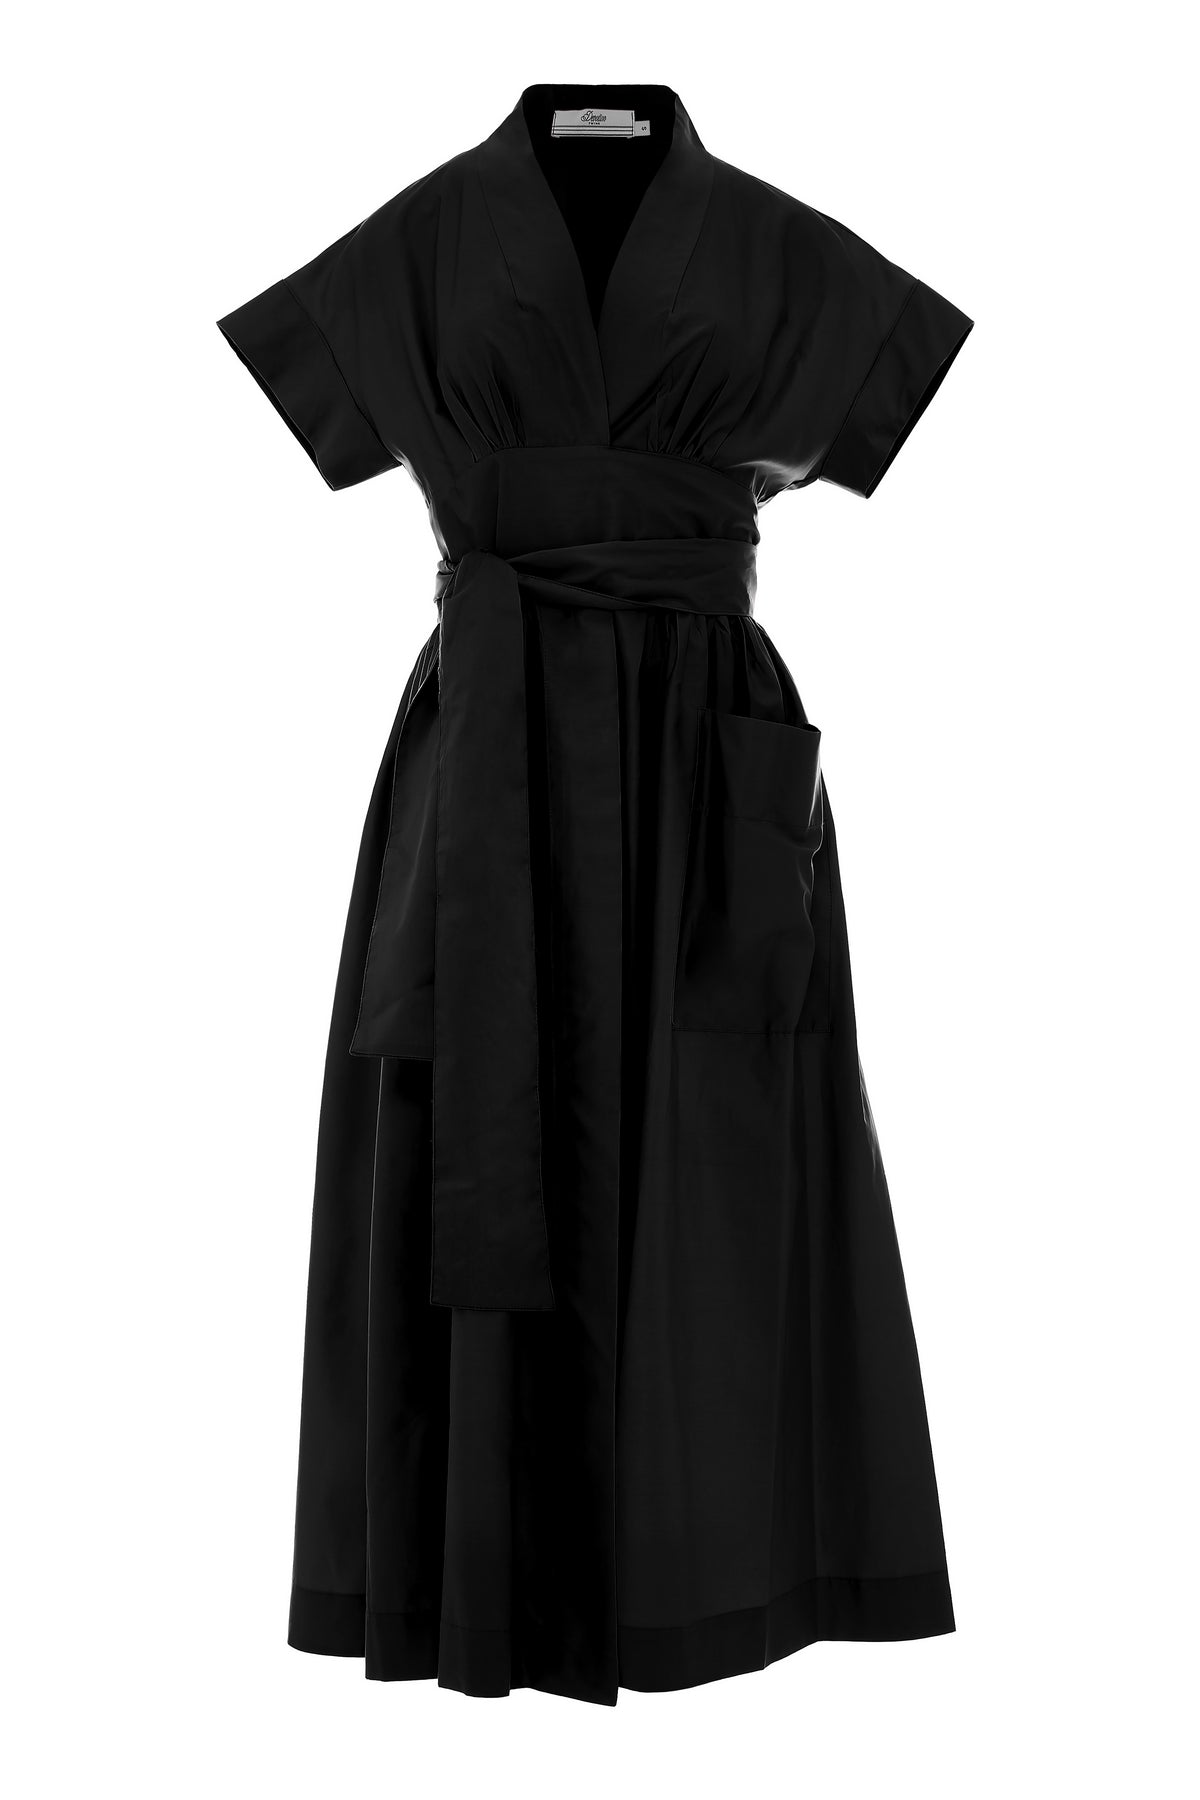 Black wrap midi dress with front patch pockets and shawl collar with short sleeves